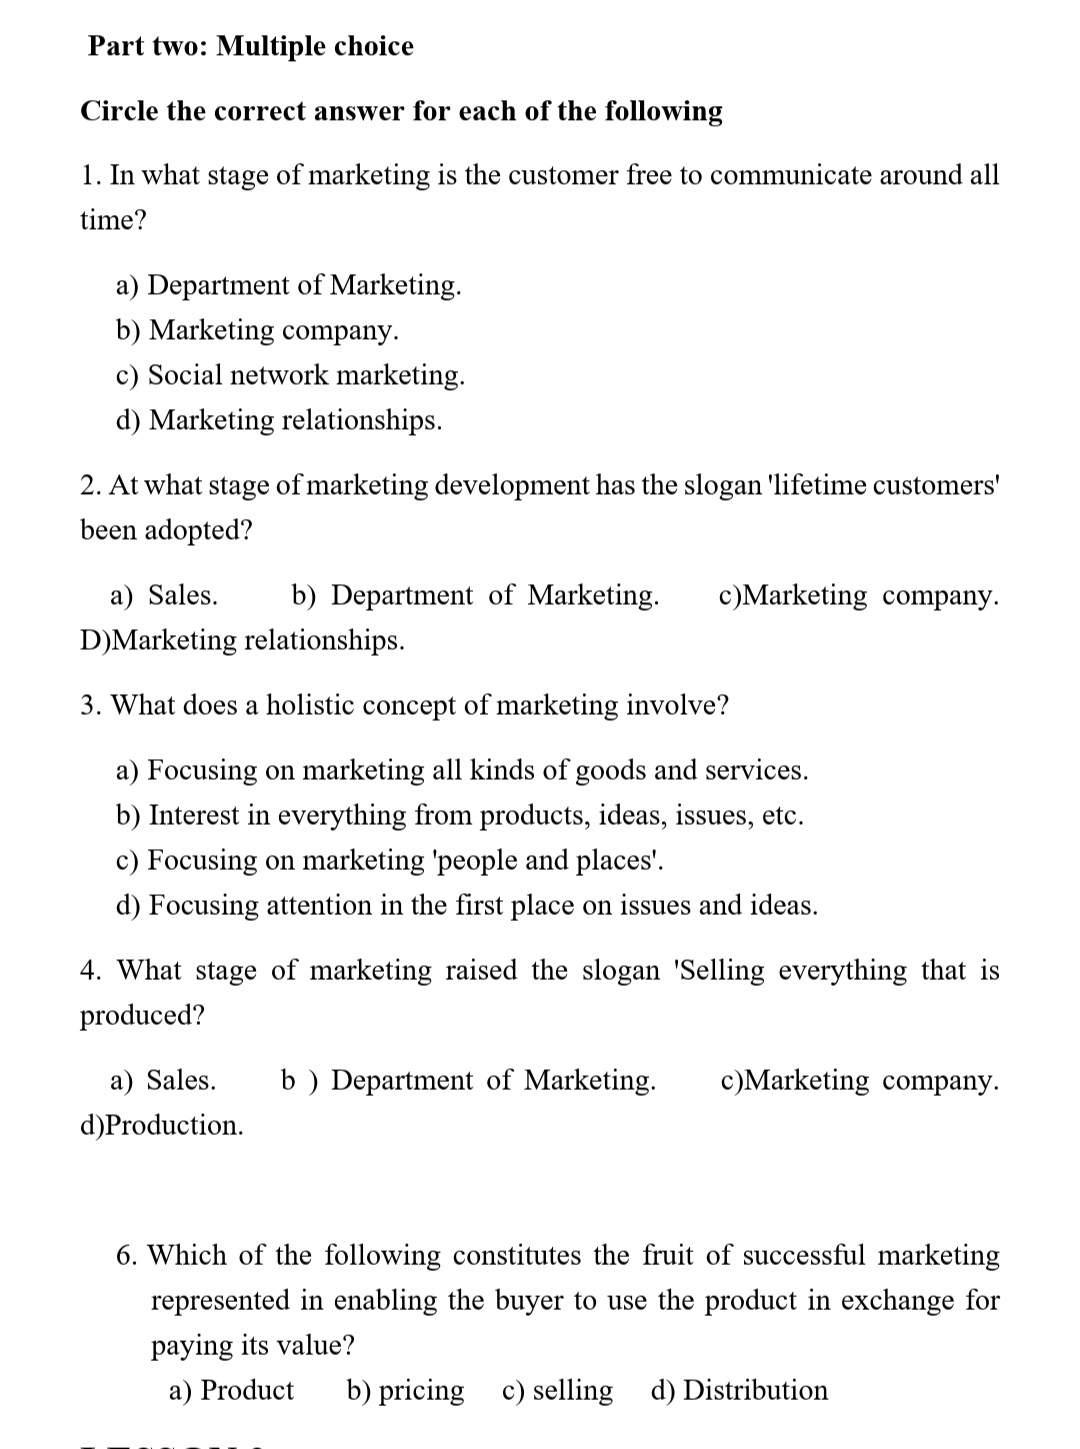 Part two: Multiple choice
Circle the correct answer for each of the following
1. In what stage of marketing is the customer free to communicate around all
time?
a) Department of Marketing.
b) Marketing company.
c) Social network marketing.
d) Marketing relationships.
2. At what stage of marketing development has the slogan 'lifetime customers'
been adopted?
a) Sales.
b) Department of Marketing.
c)Marketing company.
D)Marketing relationships.
3. What does a holistic concept of marketing involve?
a) Focusing on marketing all kinds of goods and services.
b) Interest in everything from products, ideas, issues, etc.
c) Focusing on marketing 'people and places'.
d) Focusing attention in the first place on issues and ideas.
4. What stage of marketing raised the slogan 'Selling everything that is
produced?
a) Sales.
b ) Department of Marketing.
c)Marketing company.
d)Production.
6. Which of the following constitutes the fruit of successful marketing
represented in enabling the buyer to use the product in exchange for
paying its value?
a) Product
b) pricing c) selling d) Distribution
